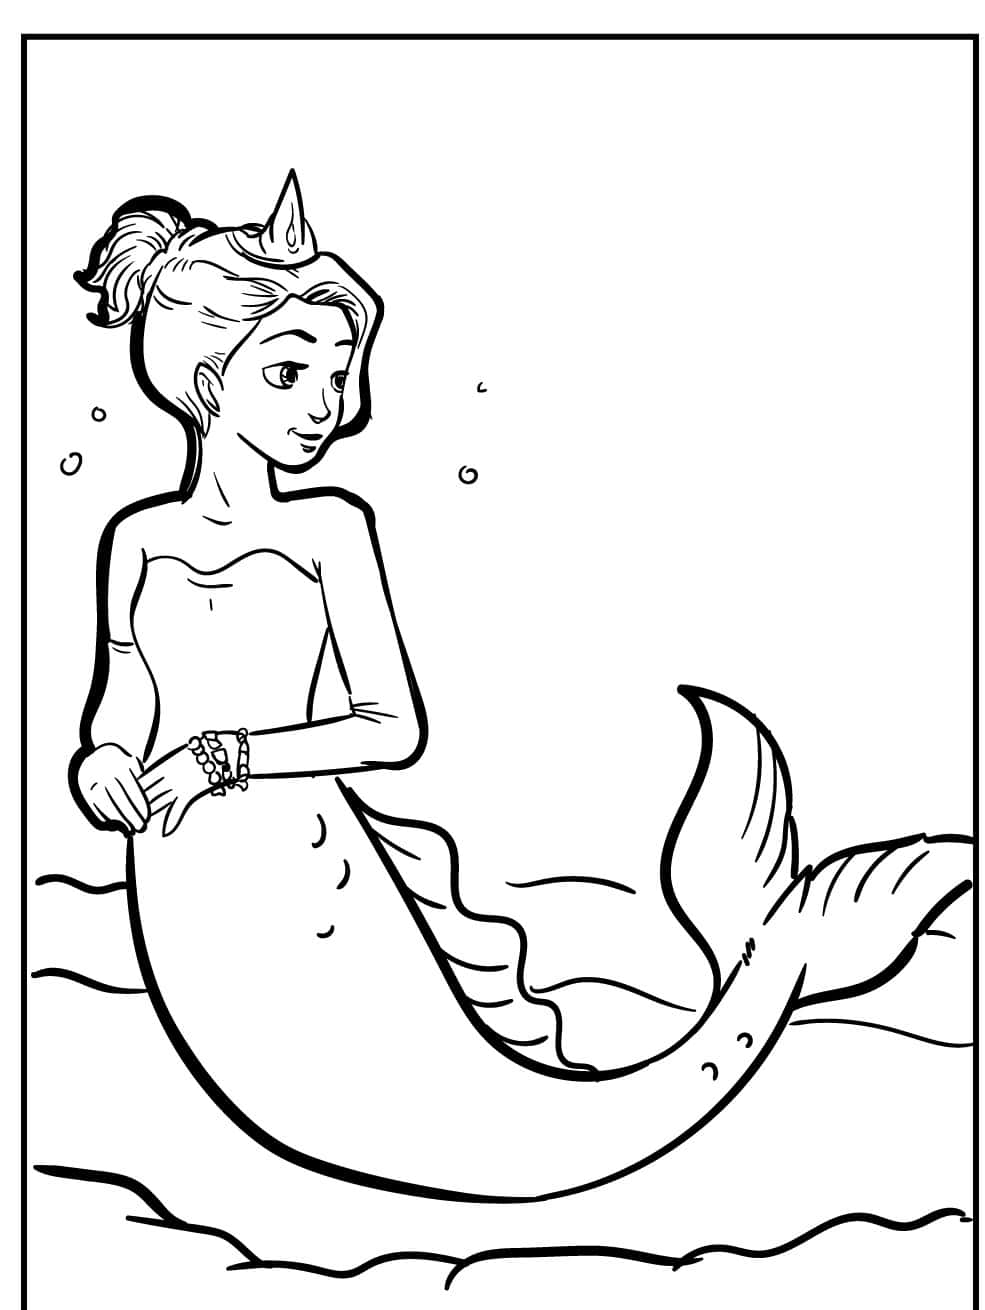 Download a mermaid coloring page with a princess